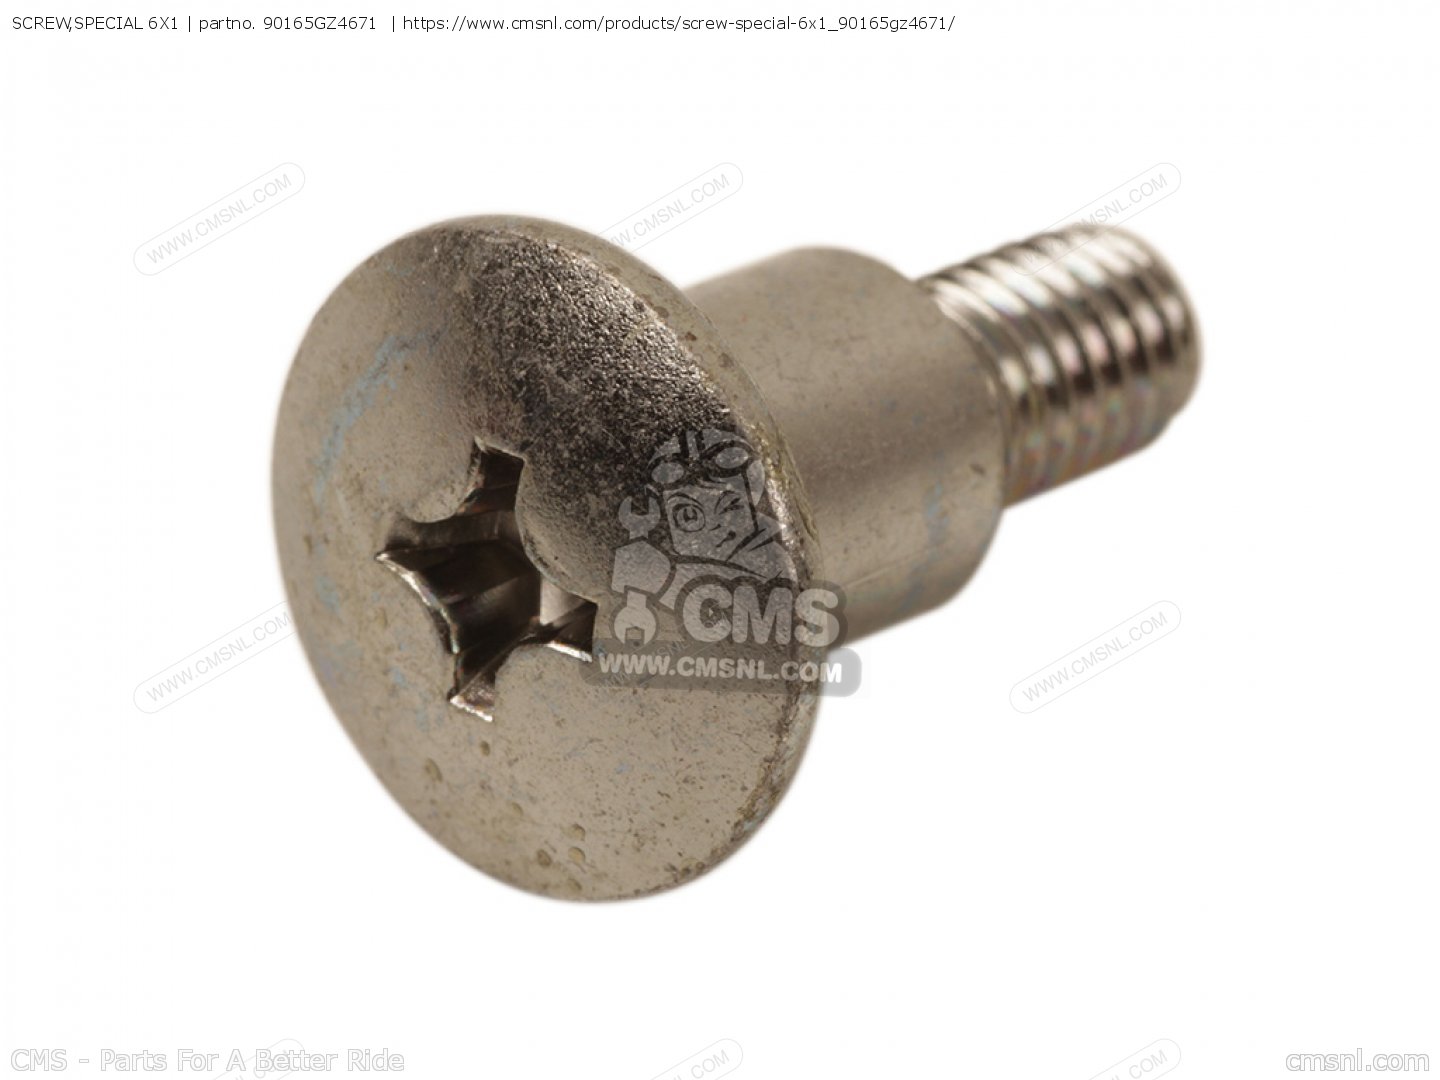 SCREW,SPECIAL 6X1 for EZ90 1996 (T) USA - order at CMSNL